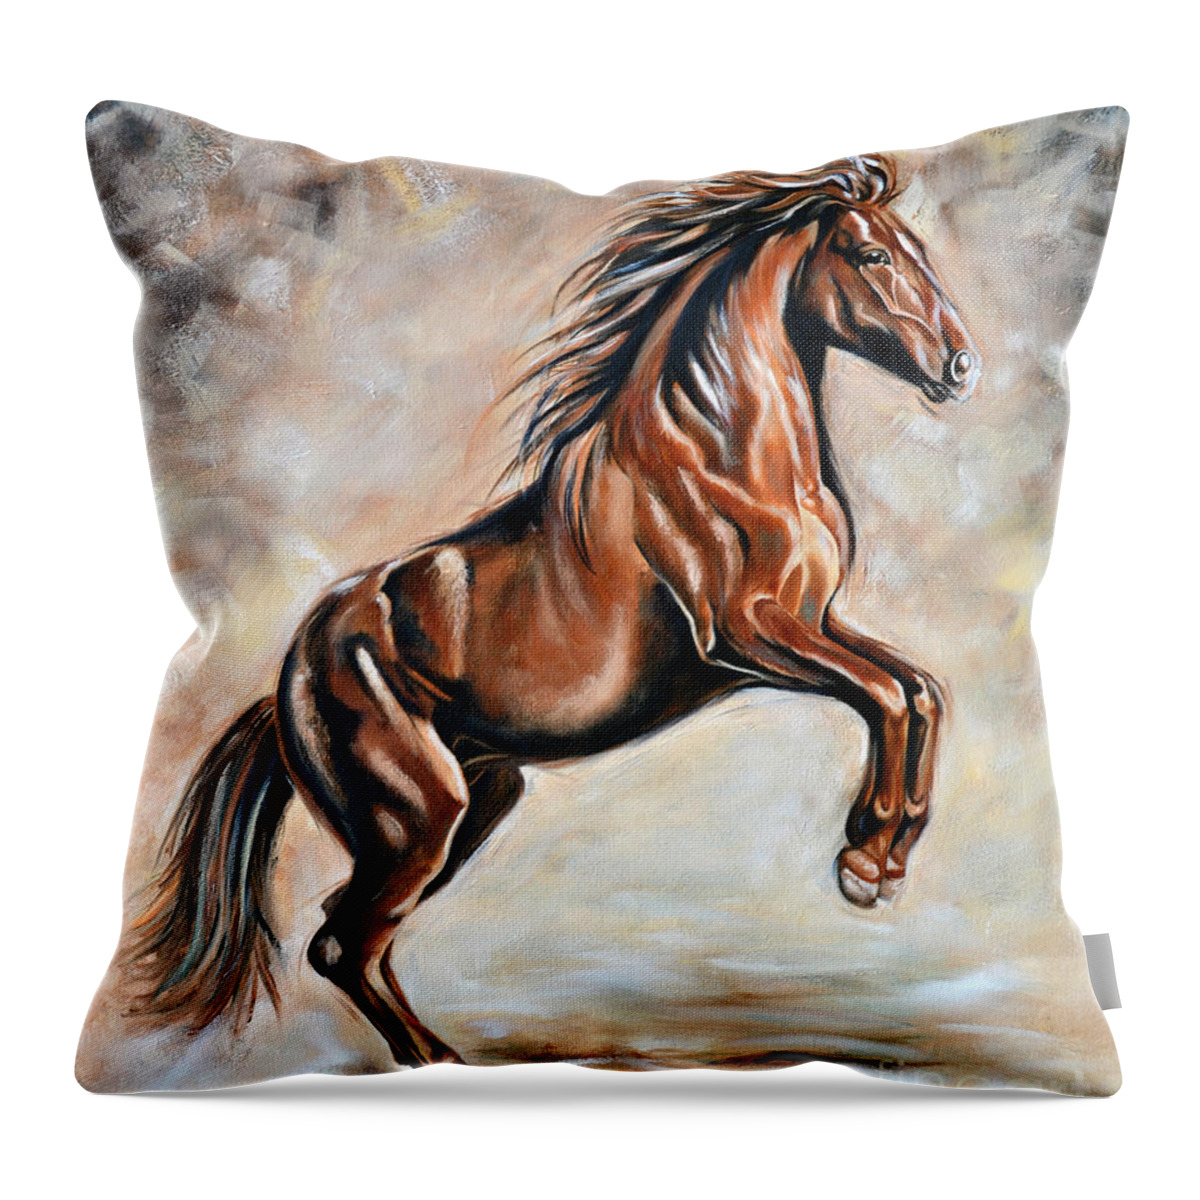 Horse Throw Pillow featuring the painting Red Beauty by Ilse Kleyn